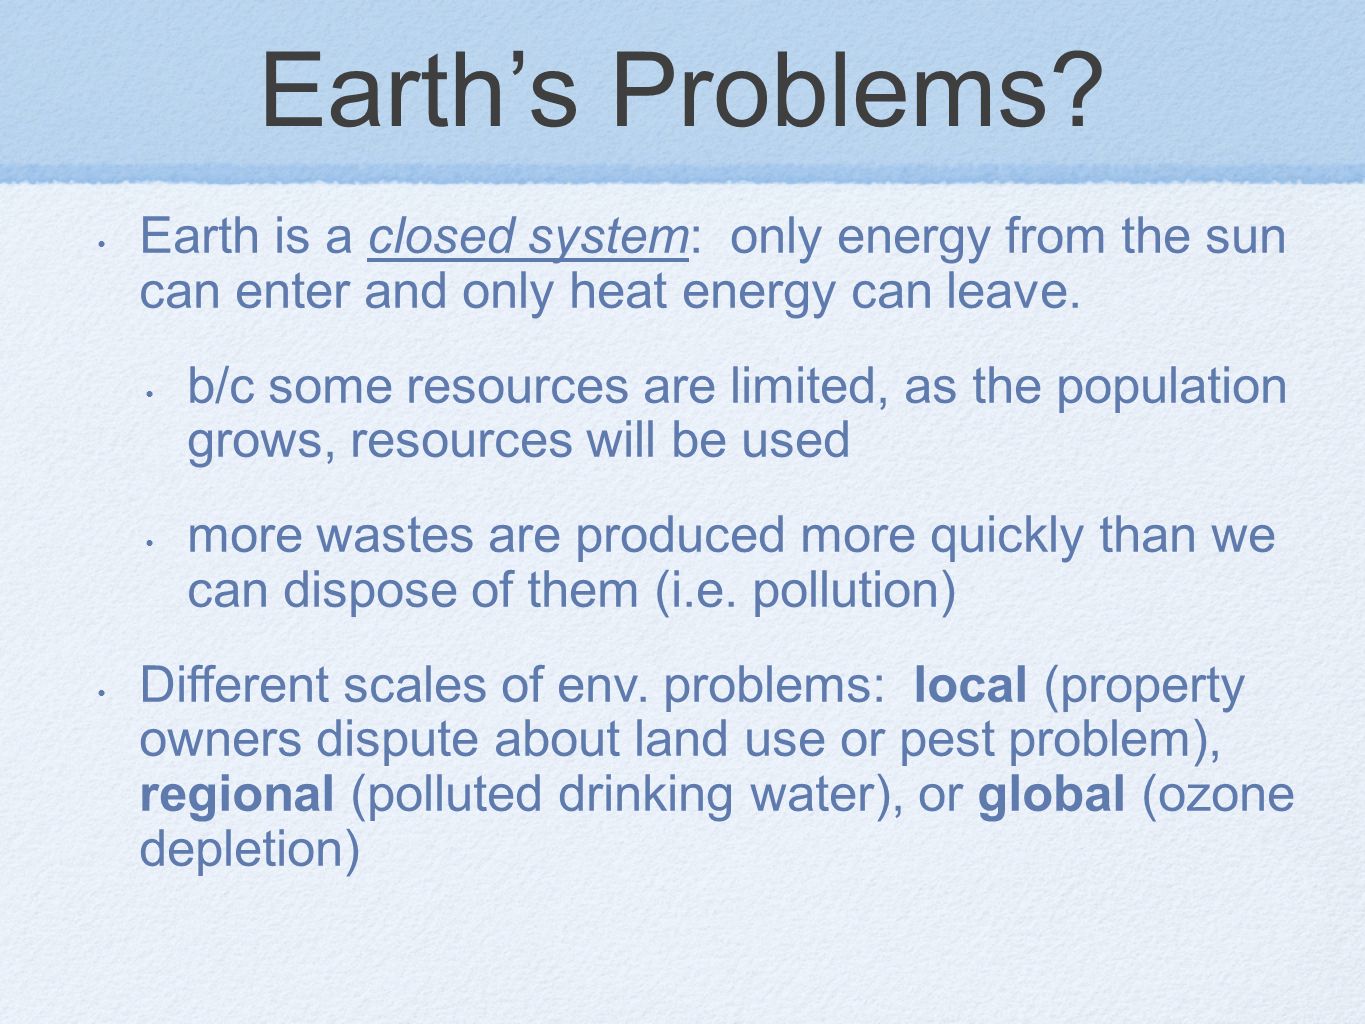 Earth’s Problems Earth is a closed system: only energy from the sun can enter and only heat energy can leave.